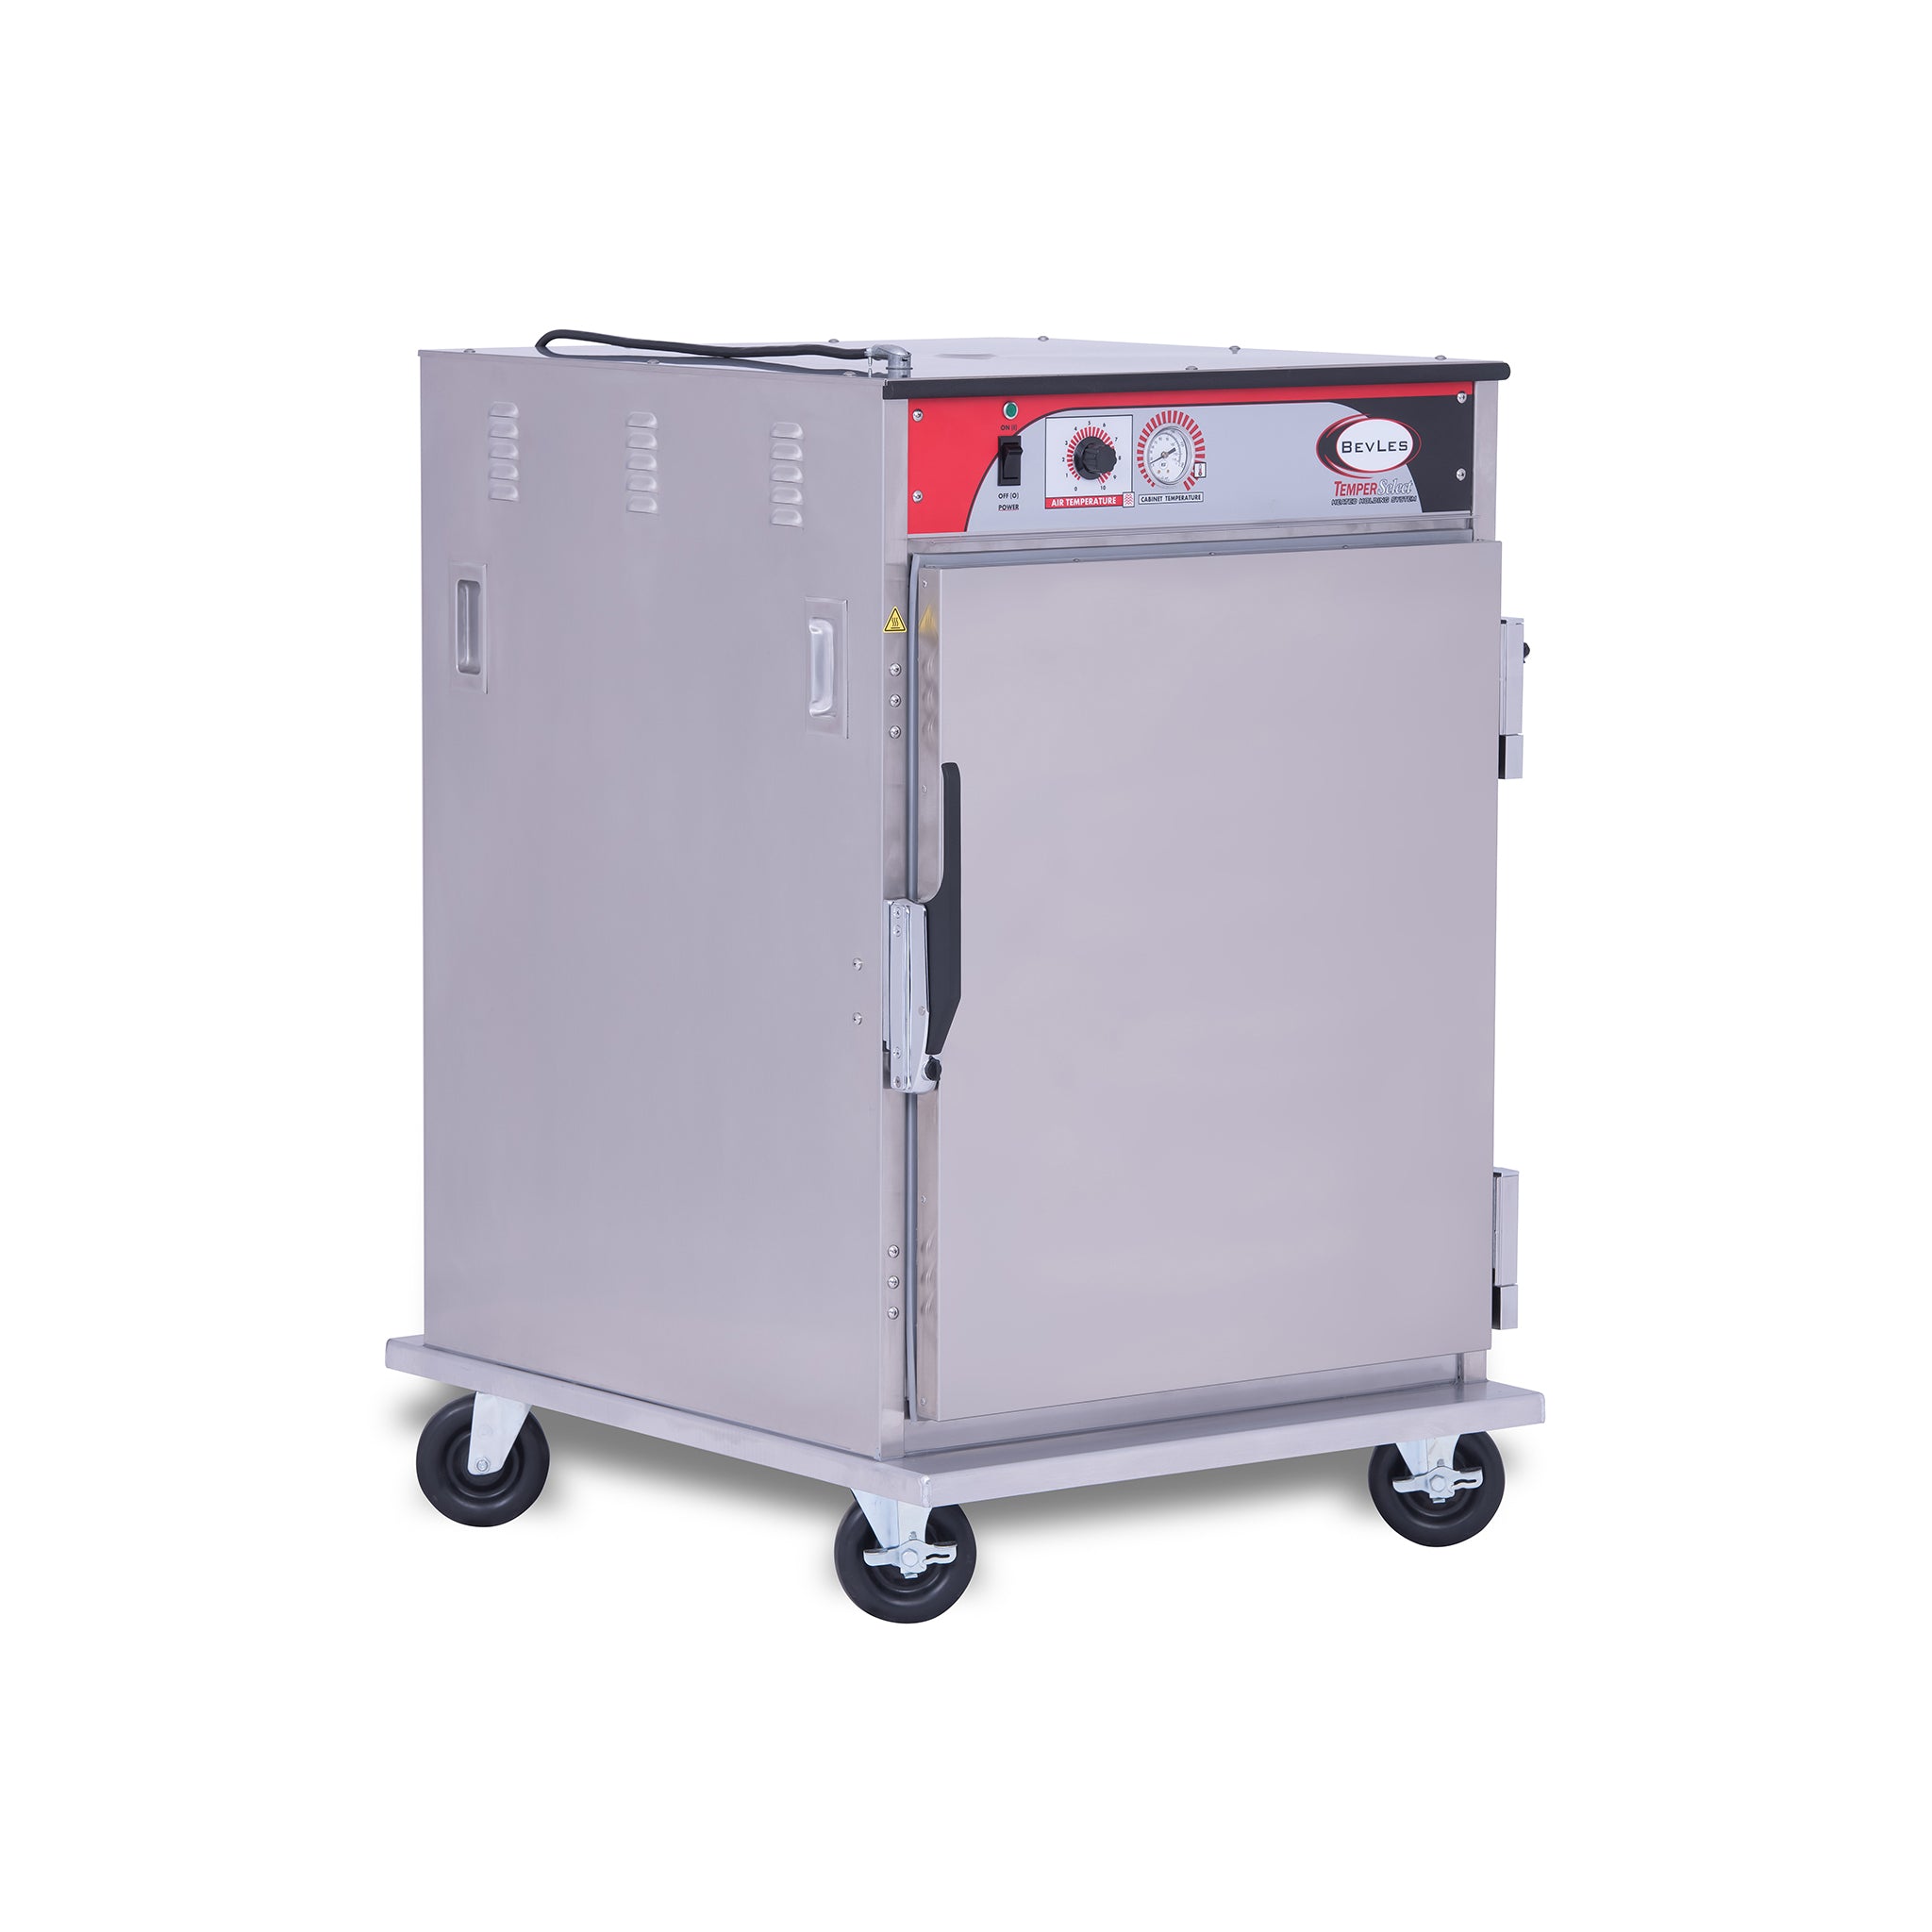 BevLes - HTSS44W61-PT, BevLes Temper Select - Pass Thru 1/2 Size Heated Holding Cabinet, Universal Width, 115V, in Silver